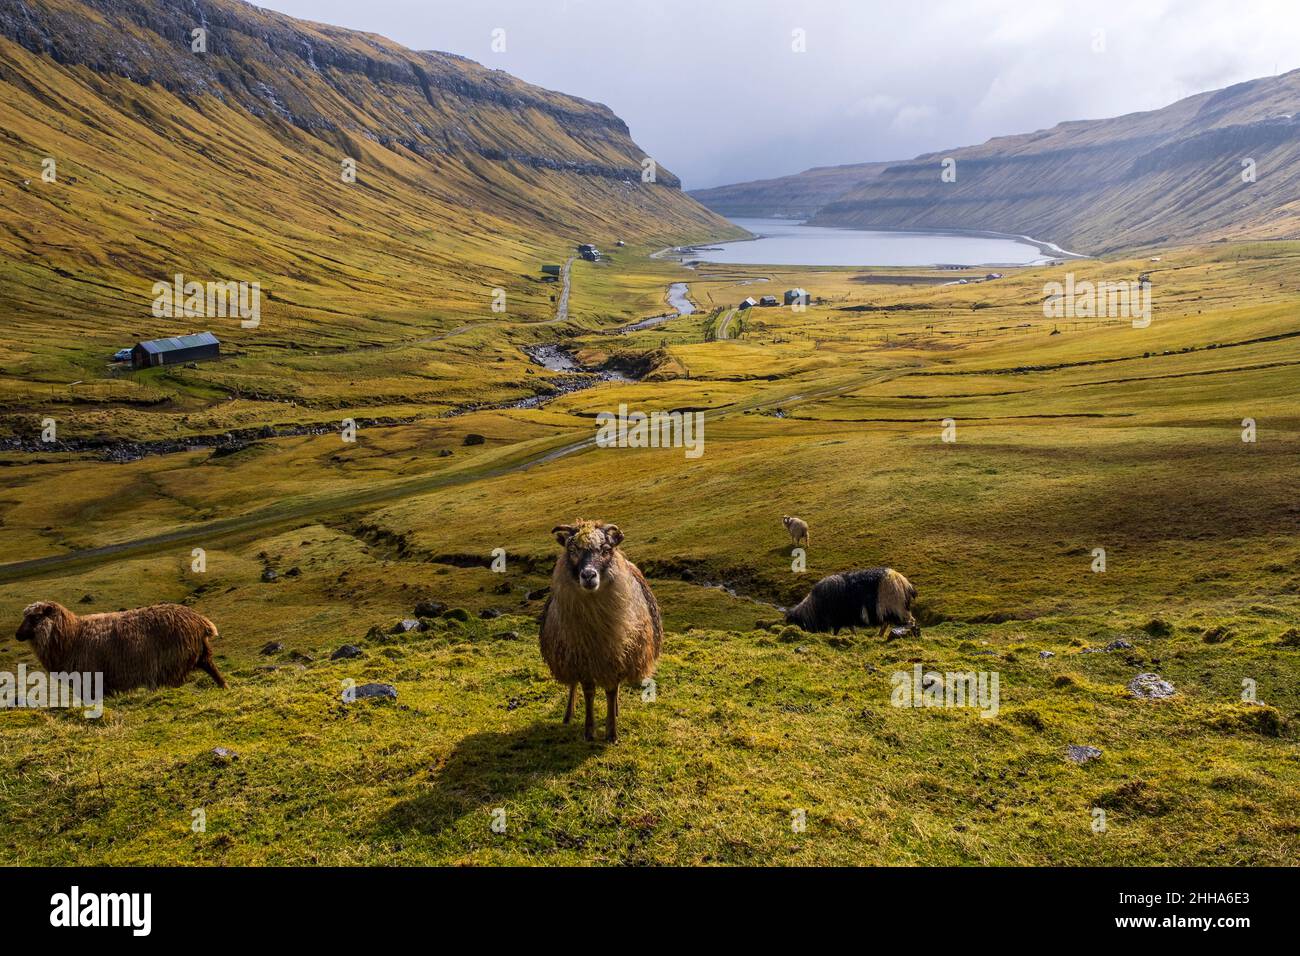 A scenic field with sheep in Faroe islands. Stock Photo